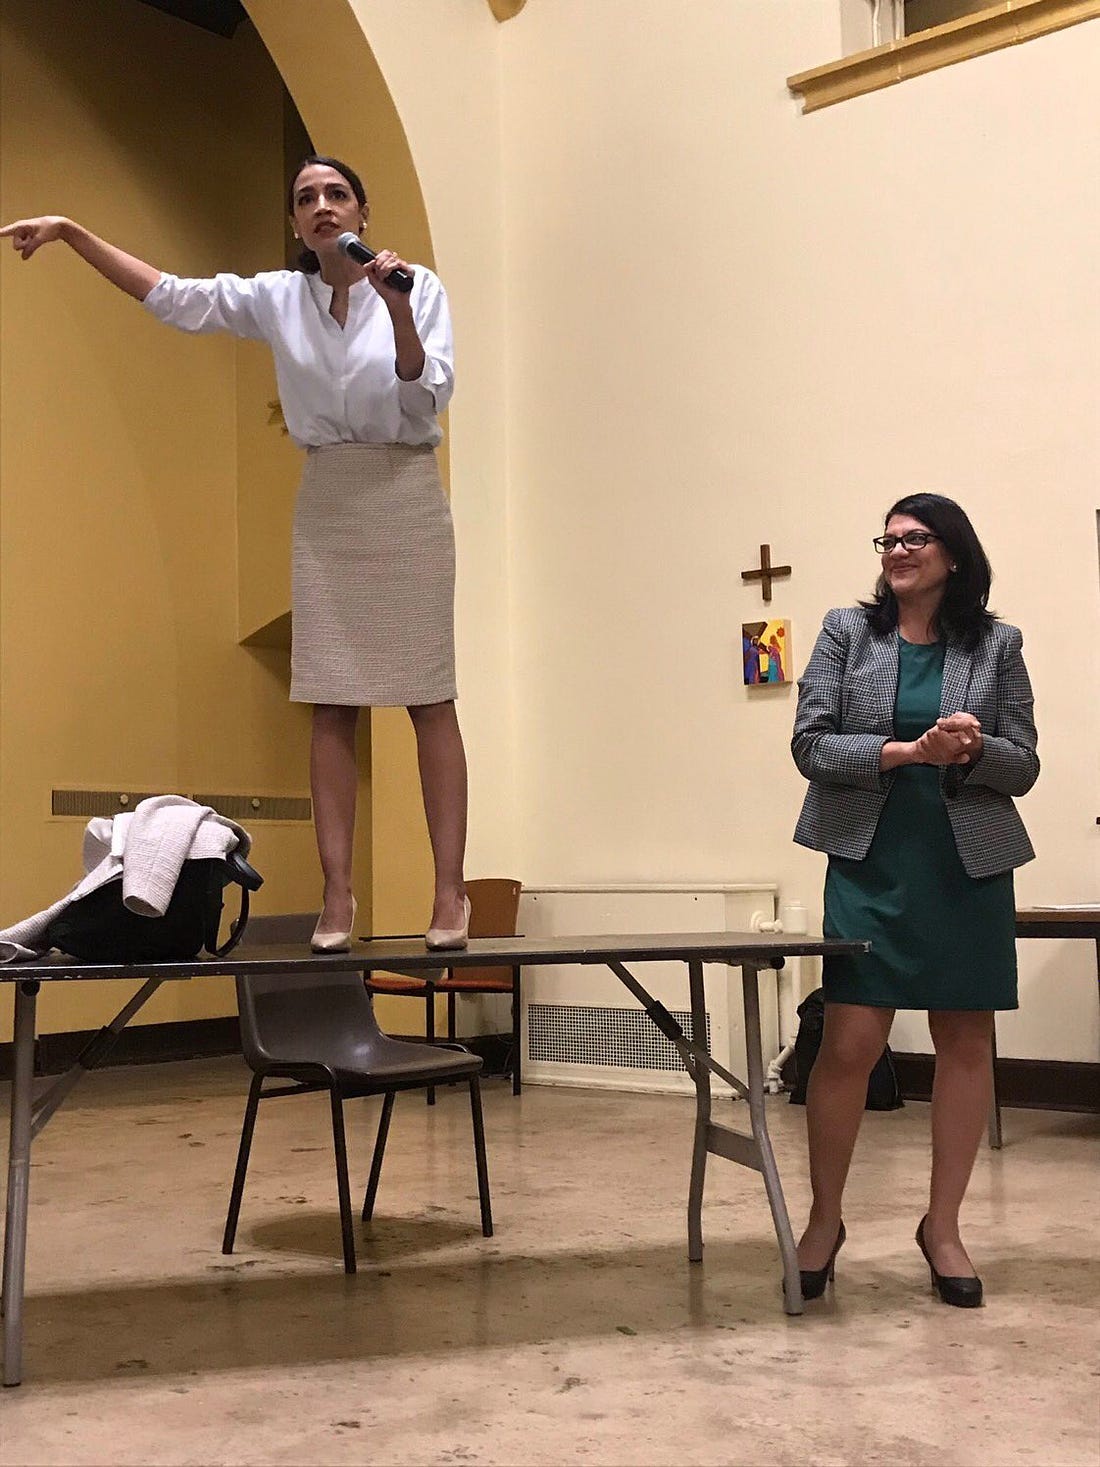 Rep. AOC stands on a table talking into a mic as Rep. Rashida Tlaib looks on smiling